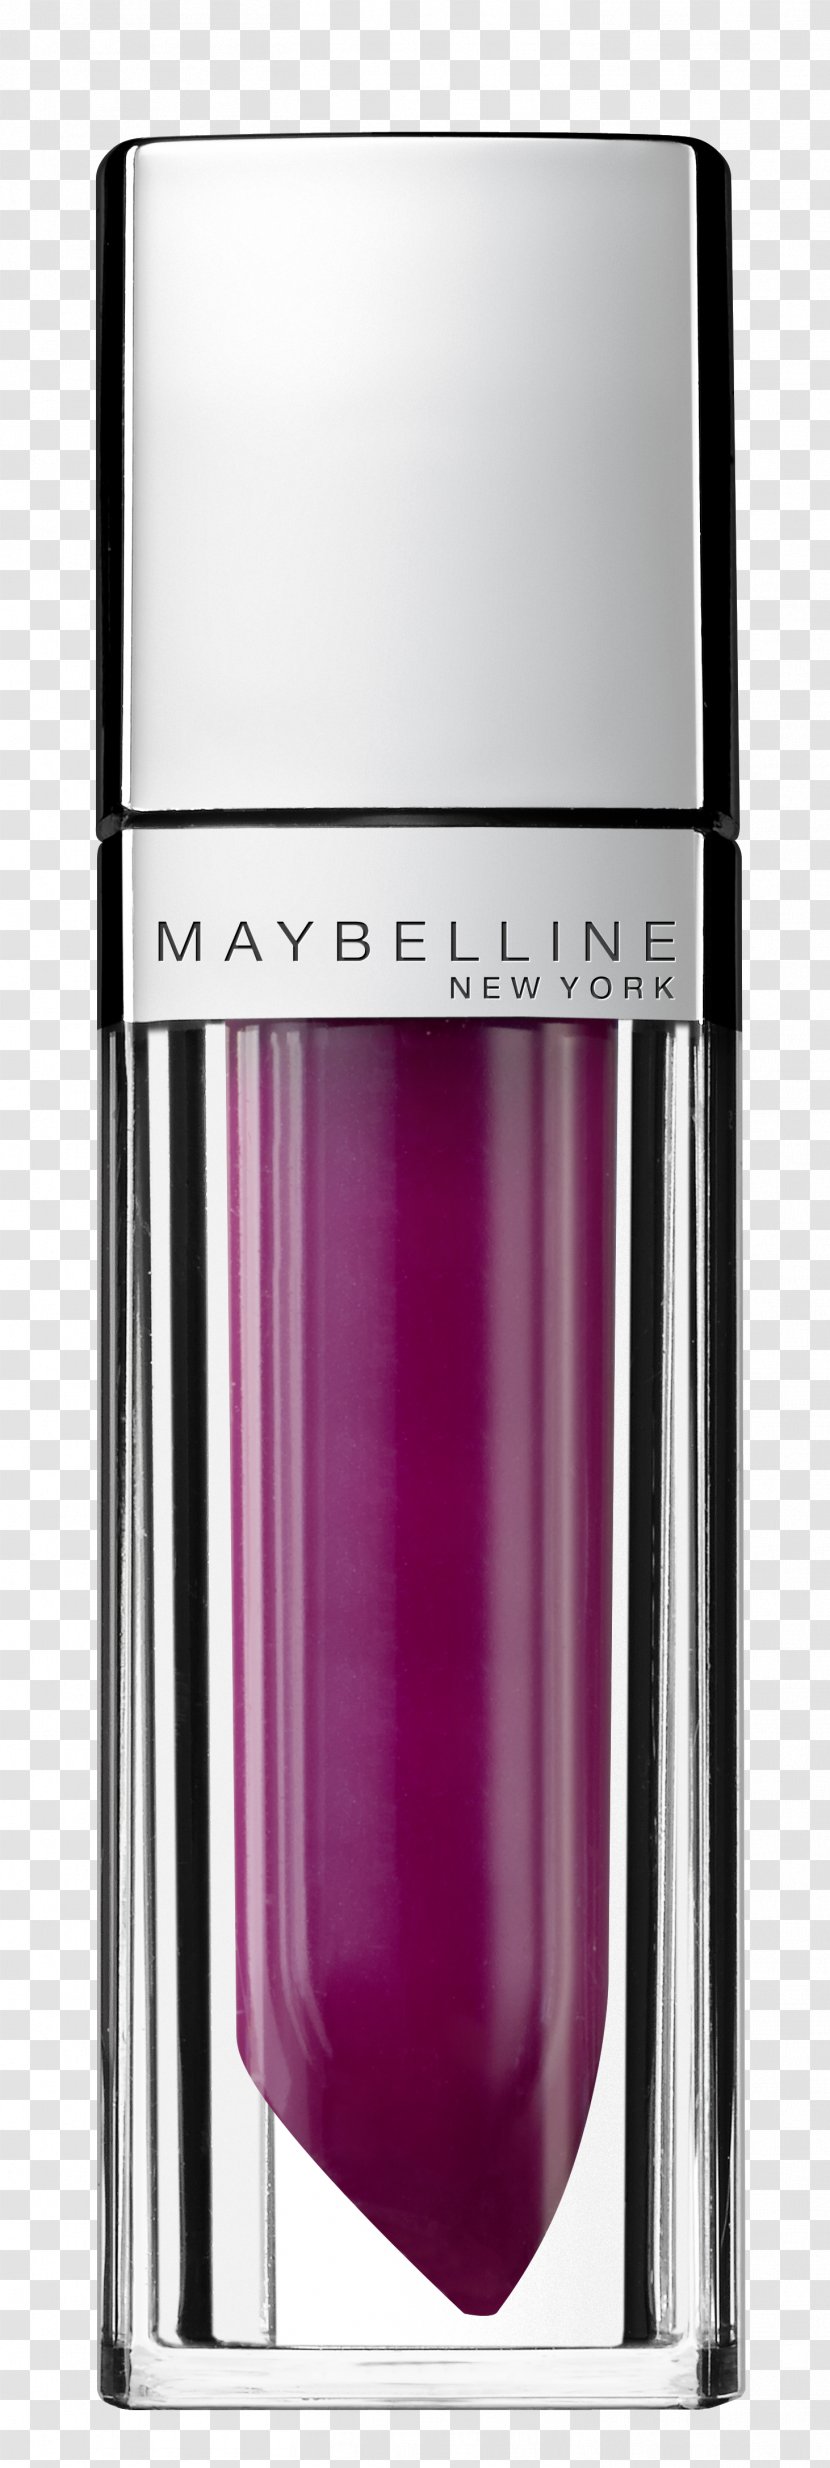 Lip Balm Lipstick Gloss Maybelline - Hair Styling Products Transparent PNG